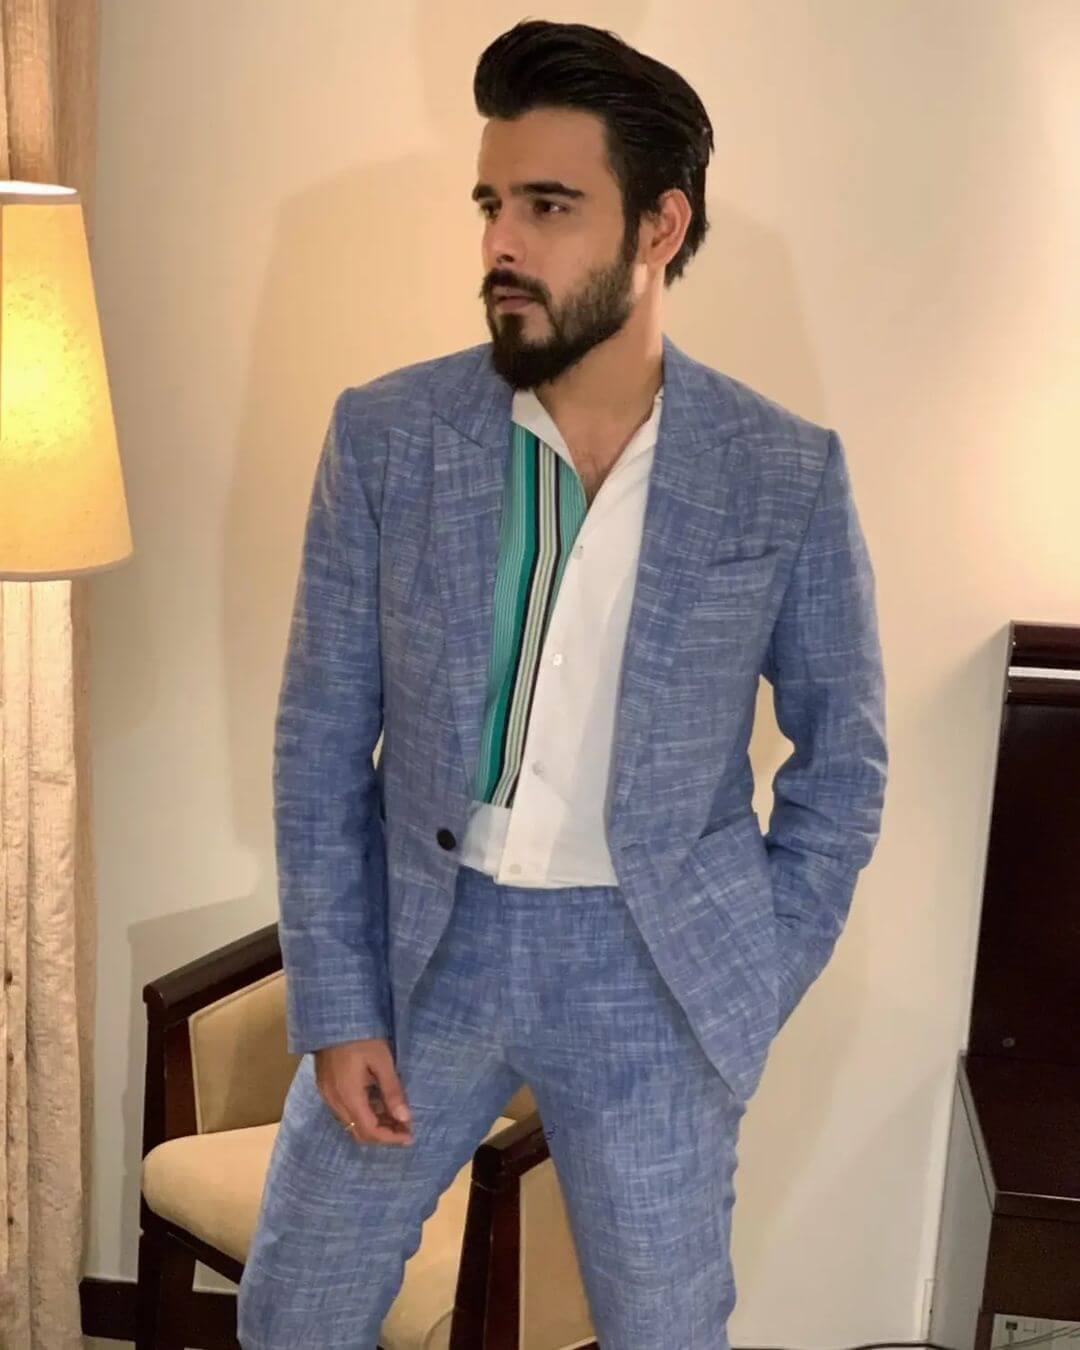 Actor Siam Ahmed in stylish suit